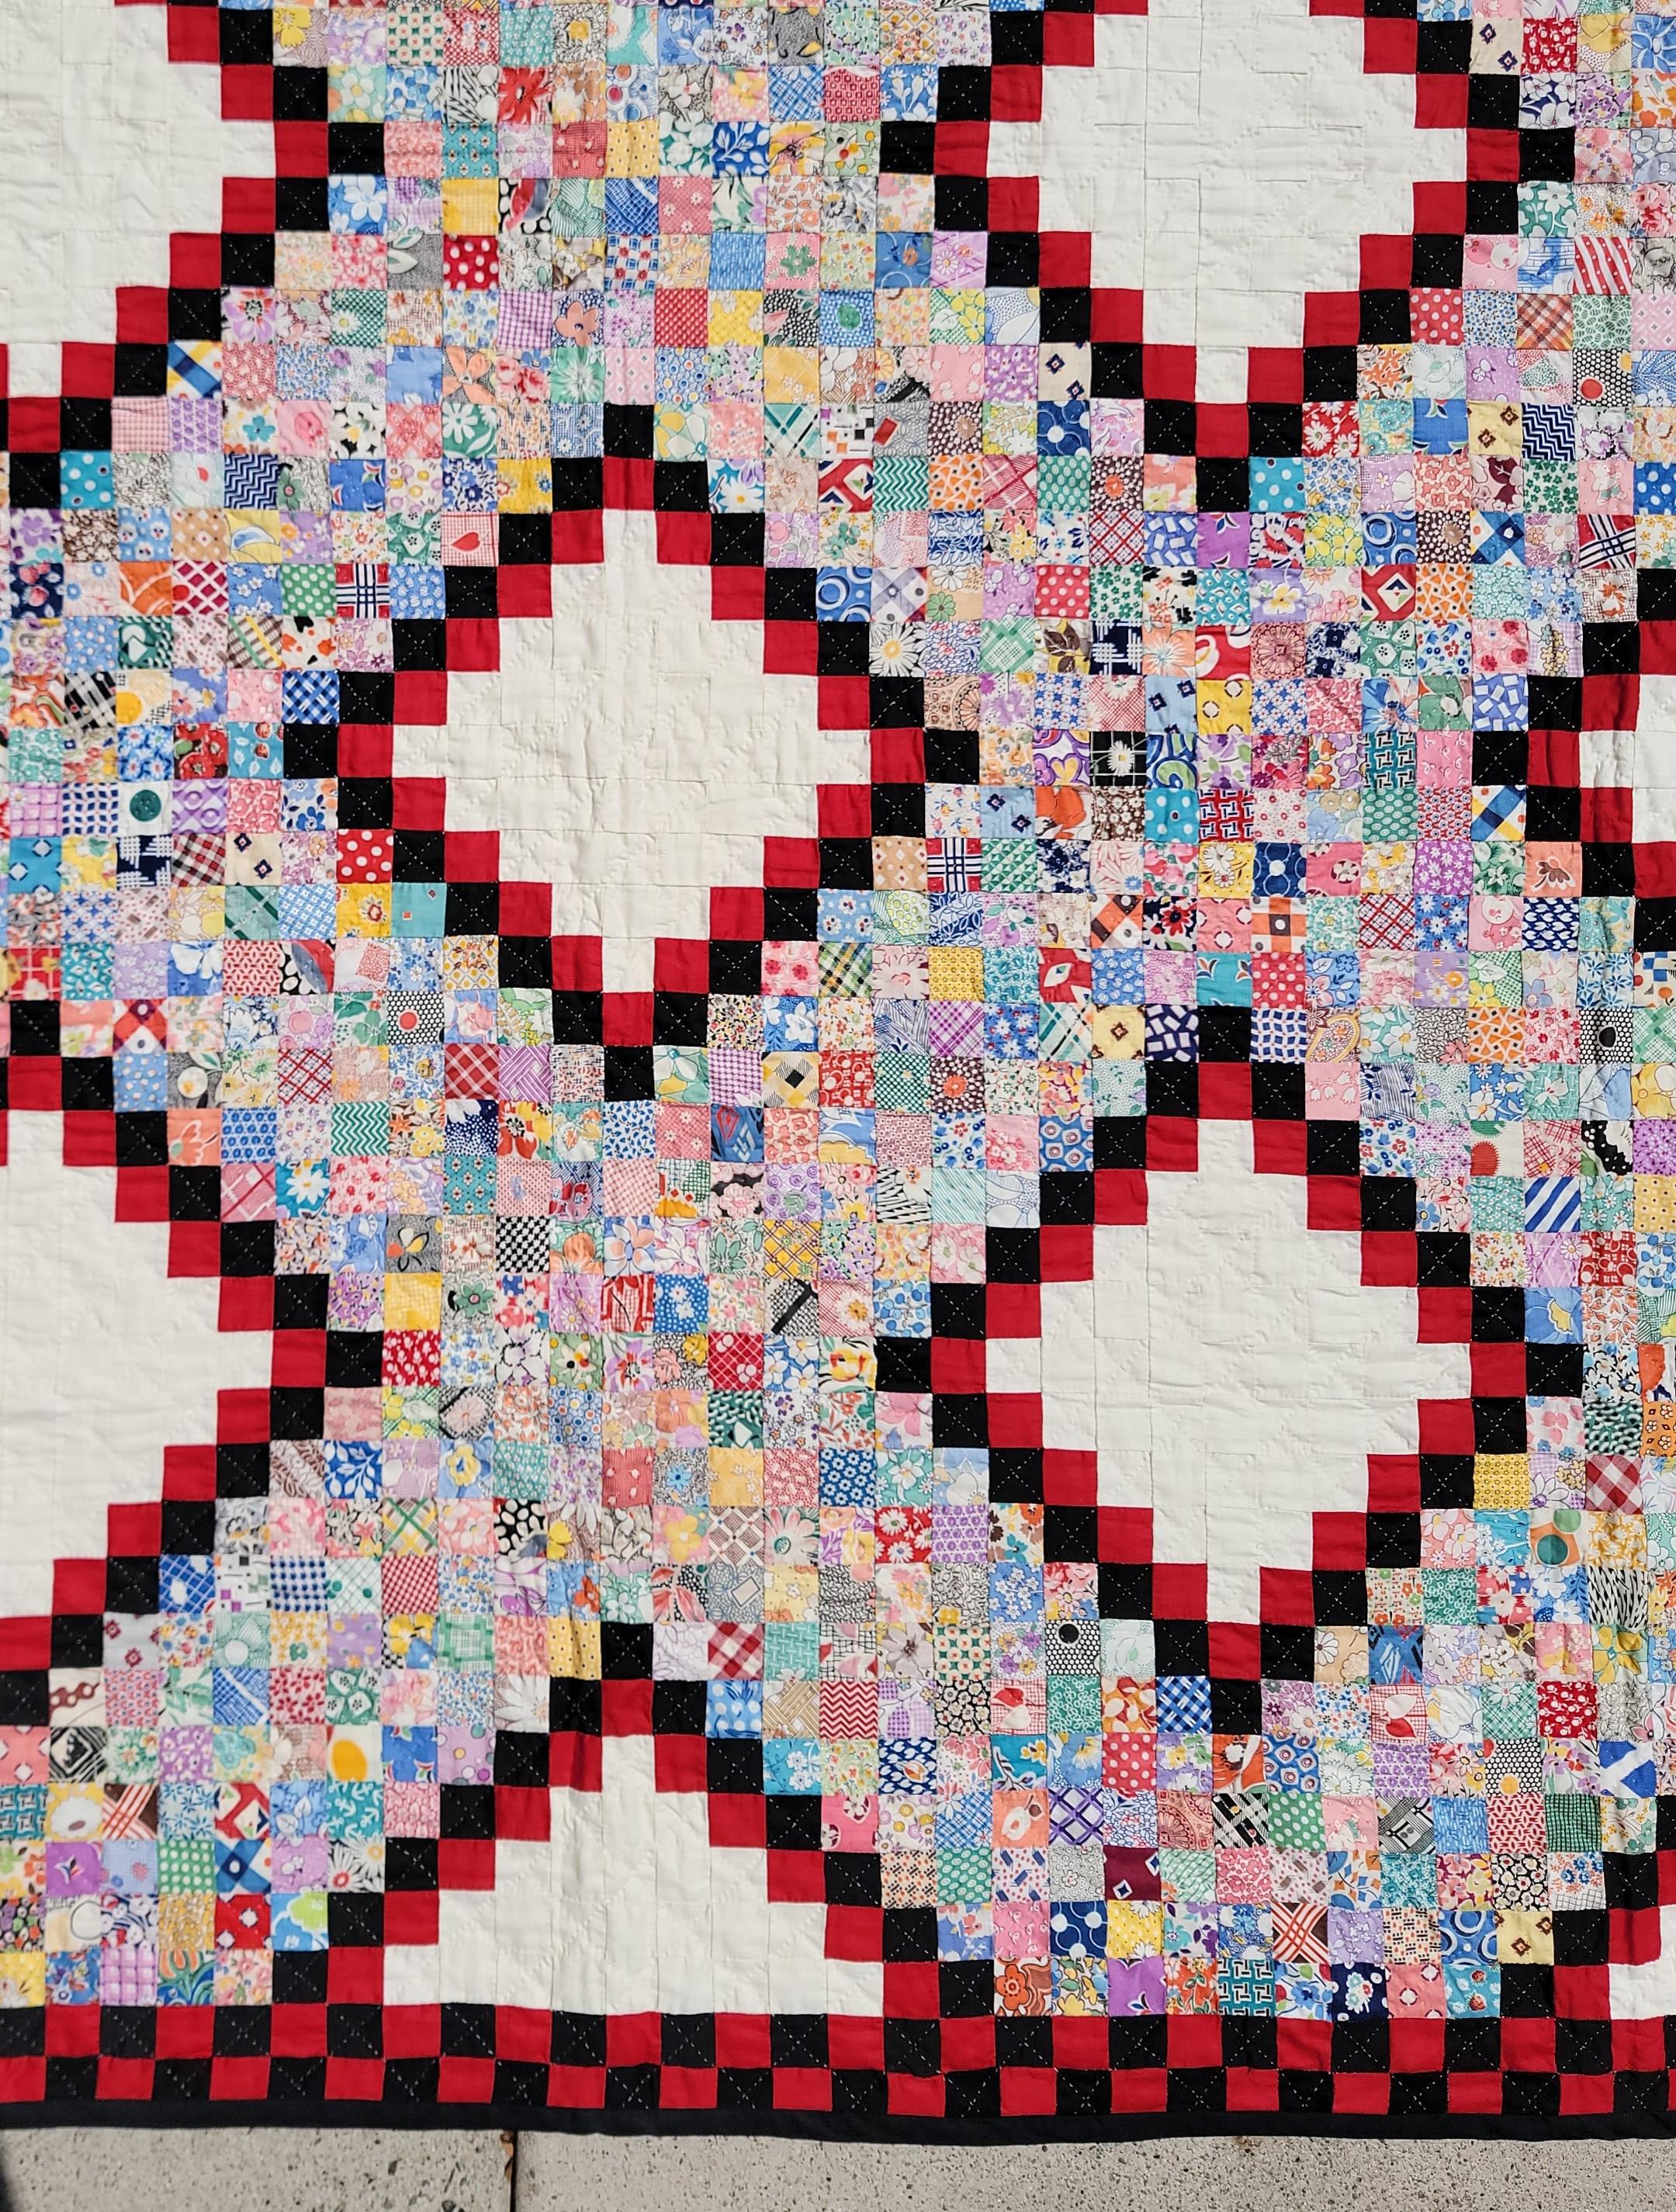 20th Century 19th C Postage Stamp Chain Quilt - 5670 Pieces  For Sale